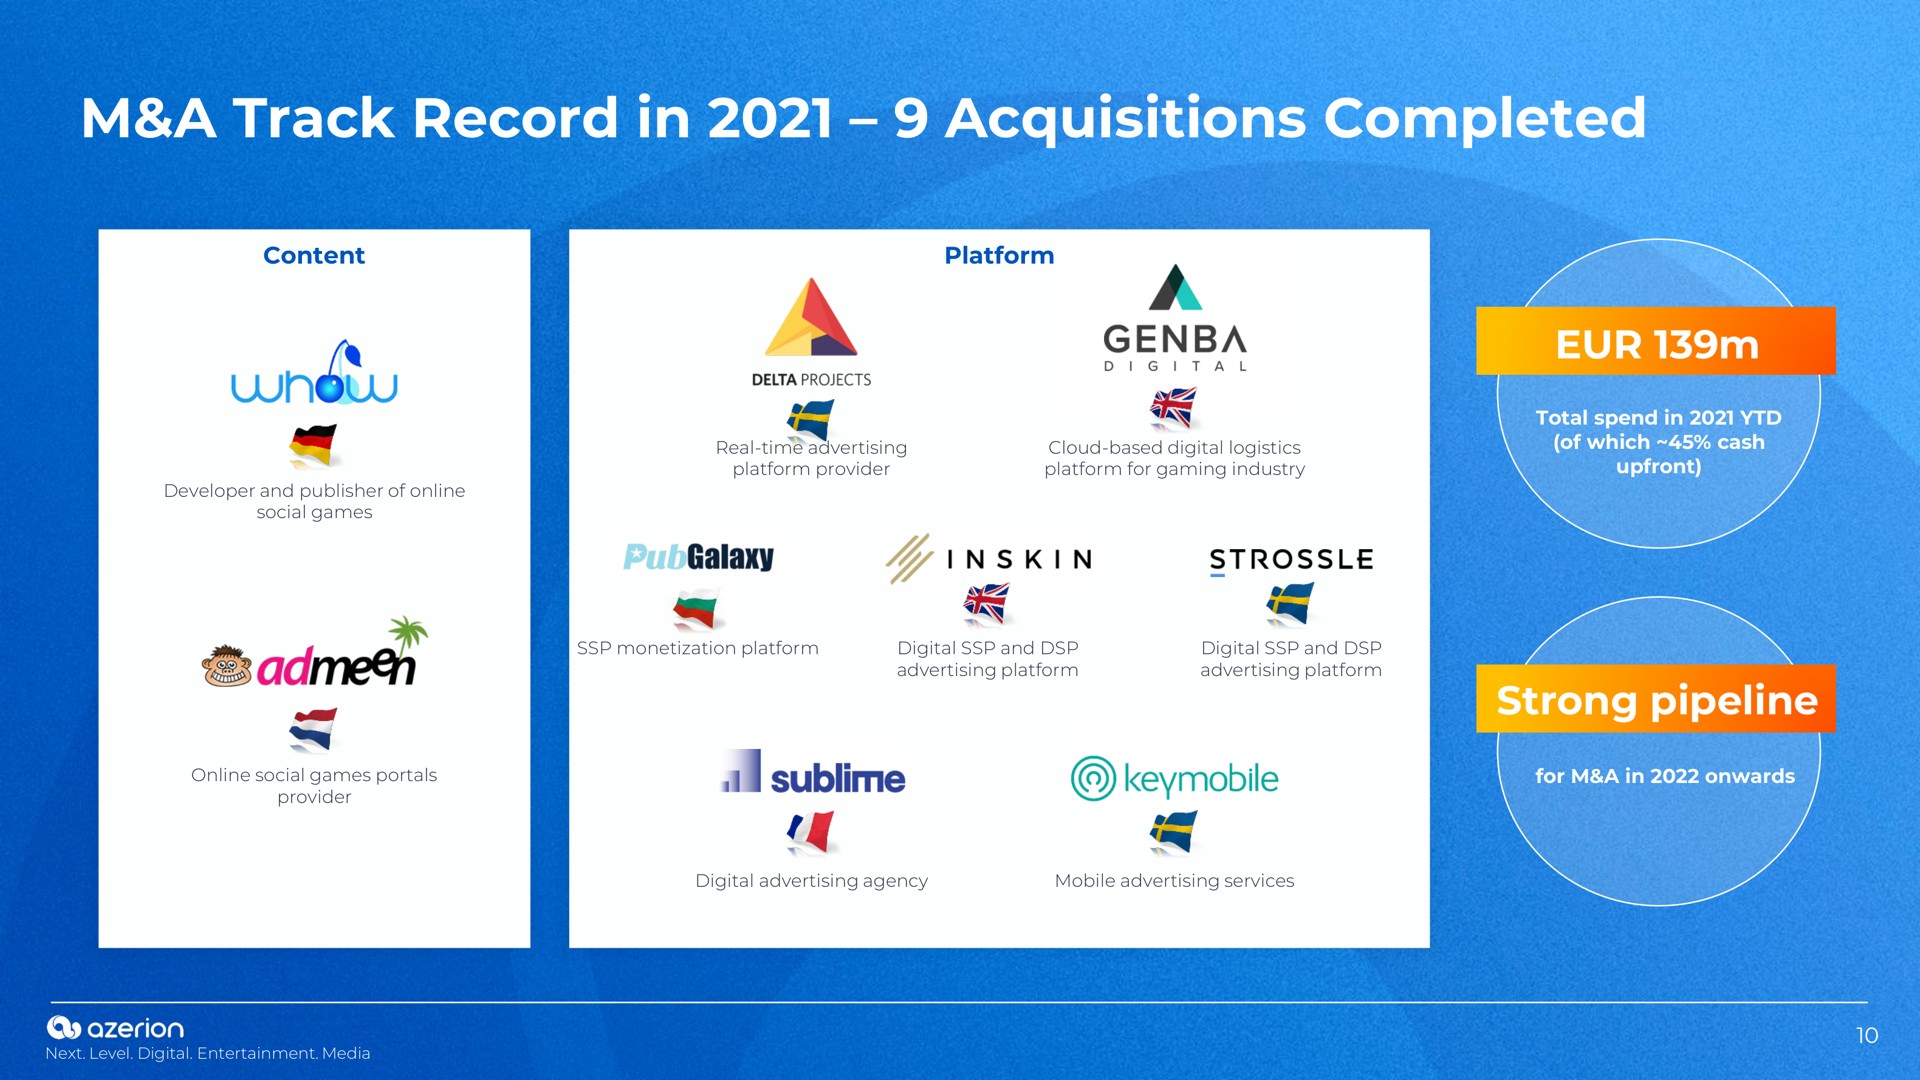 a track record in acquisitions completed strong pipeline admen galaxy i all sublime | Azerion